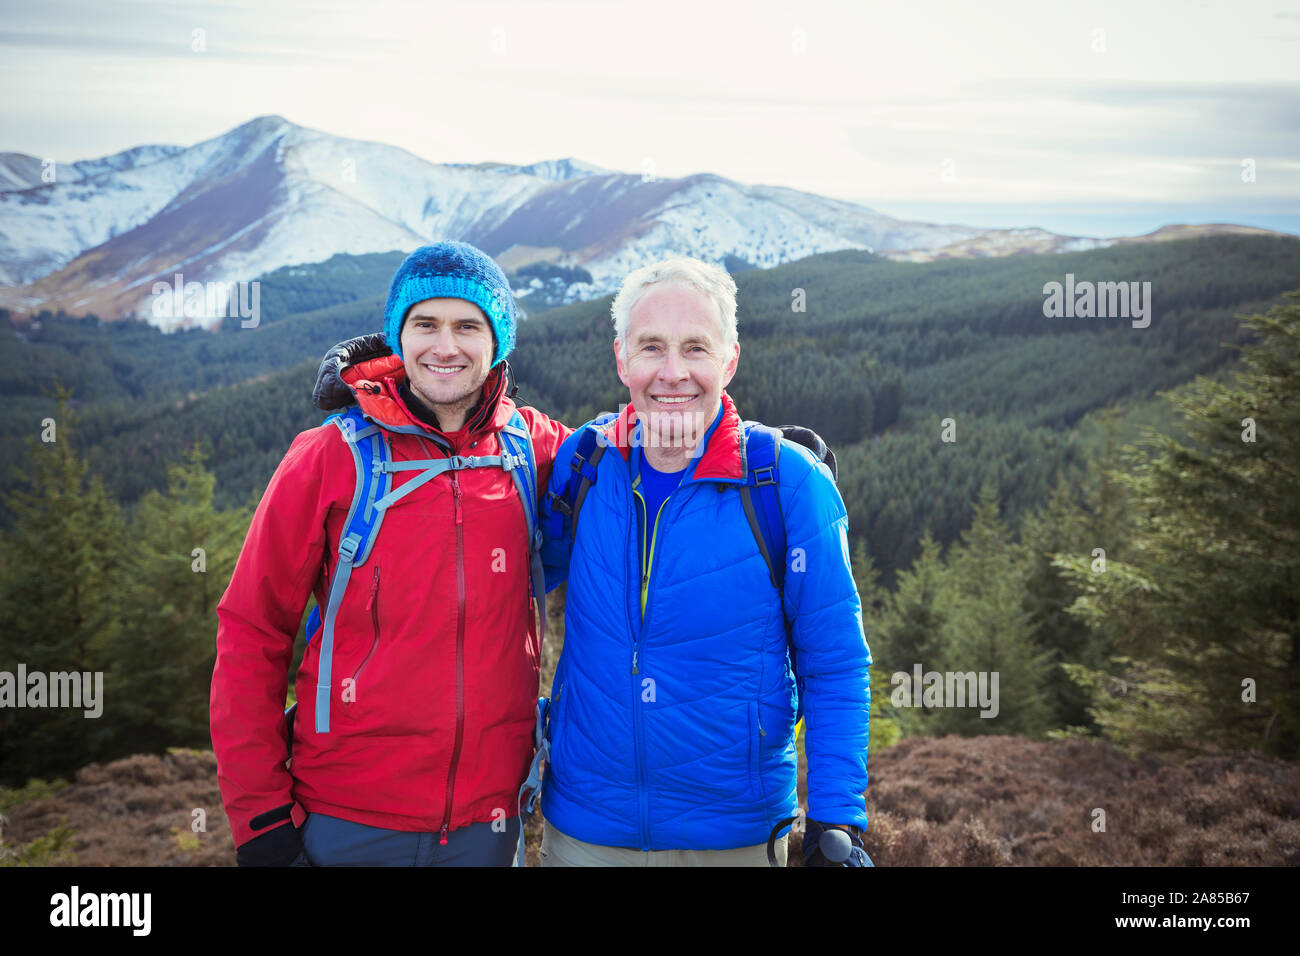 Portrait happy father and son hiking with scenic mountains in background, Lake District, UK Stock Photo